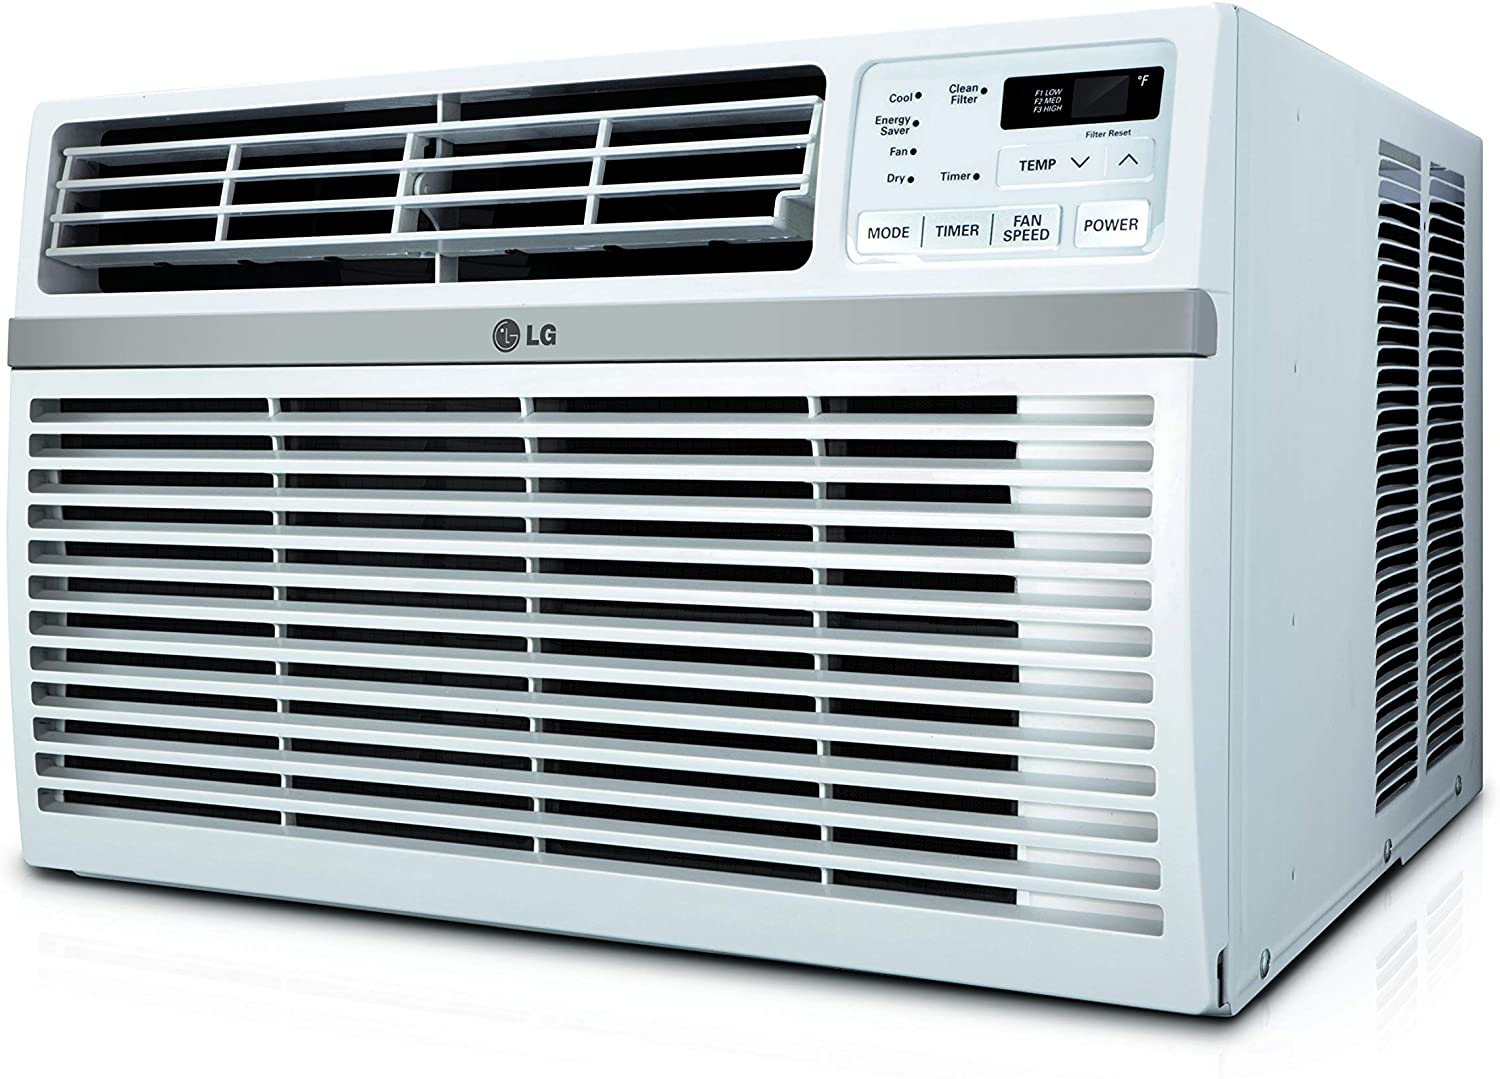 LG Star Rated Window Air Conditioner